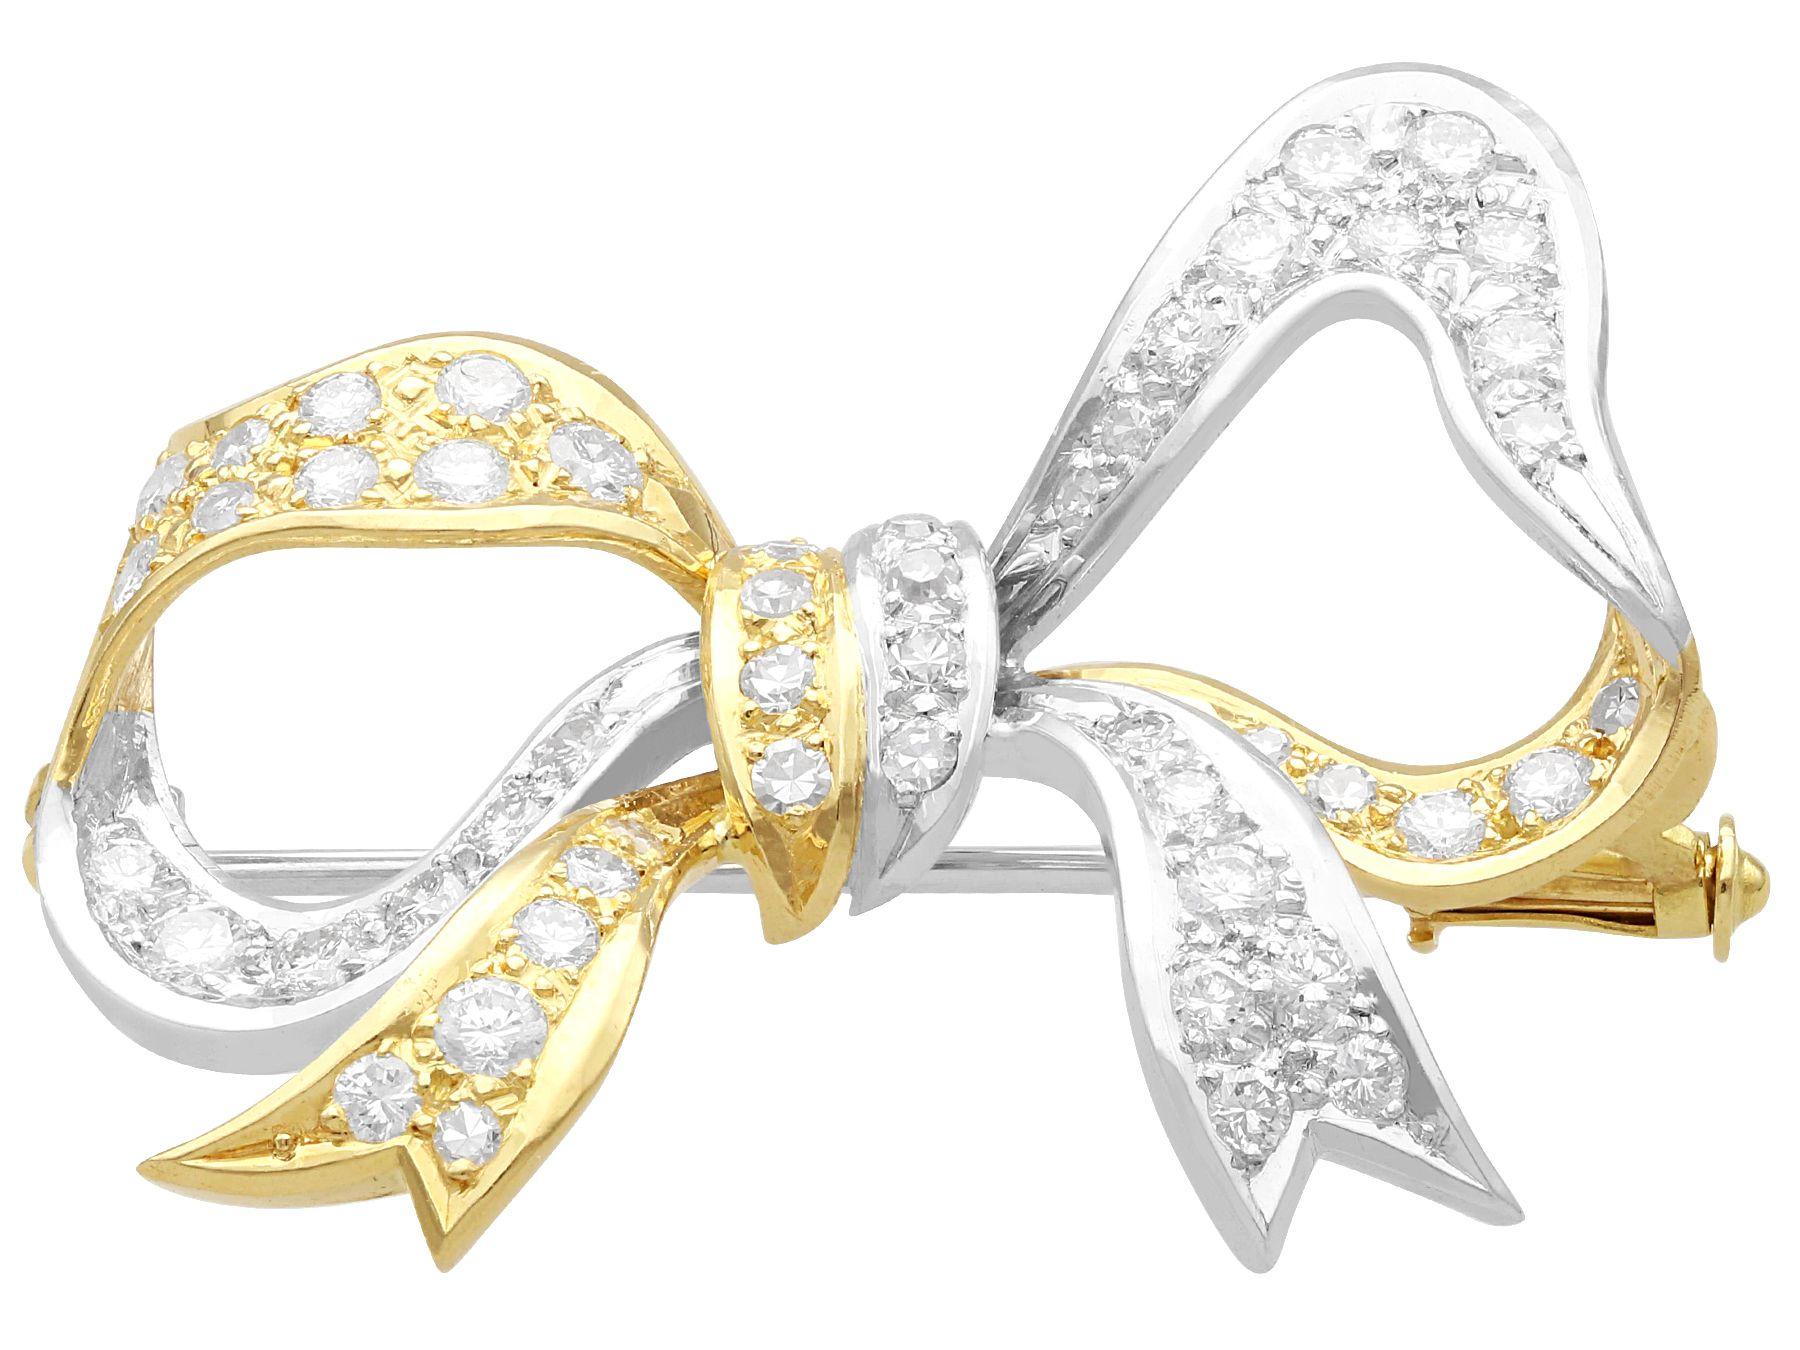 Vintage 1.70ct Diamond Two-Toned Gold Bow Brooch In Excellent Condition For Sale In Jesmond, Newcastle Upon Tyne